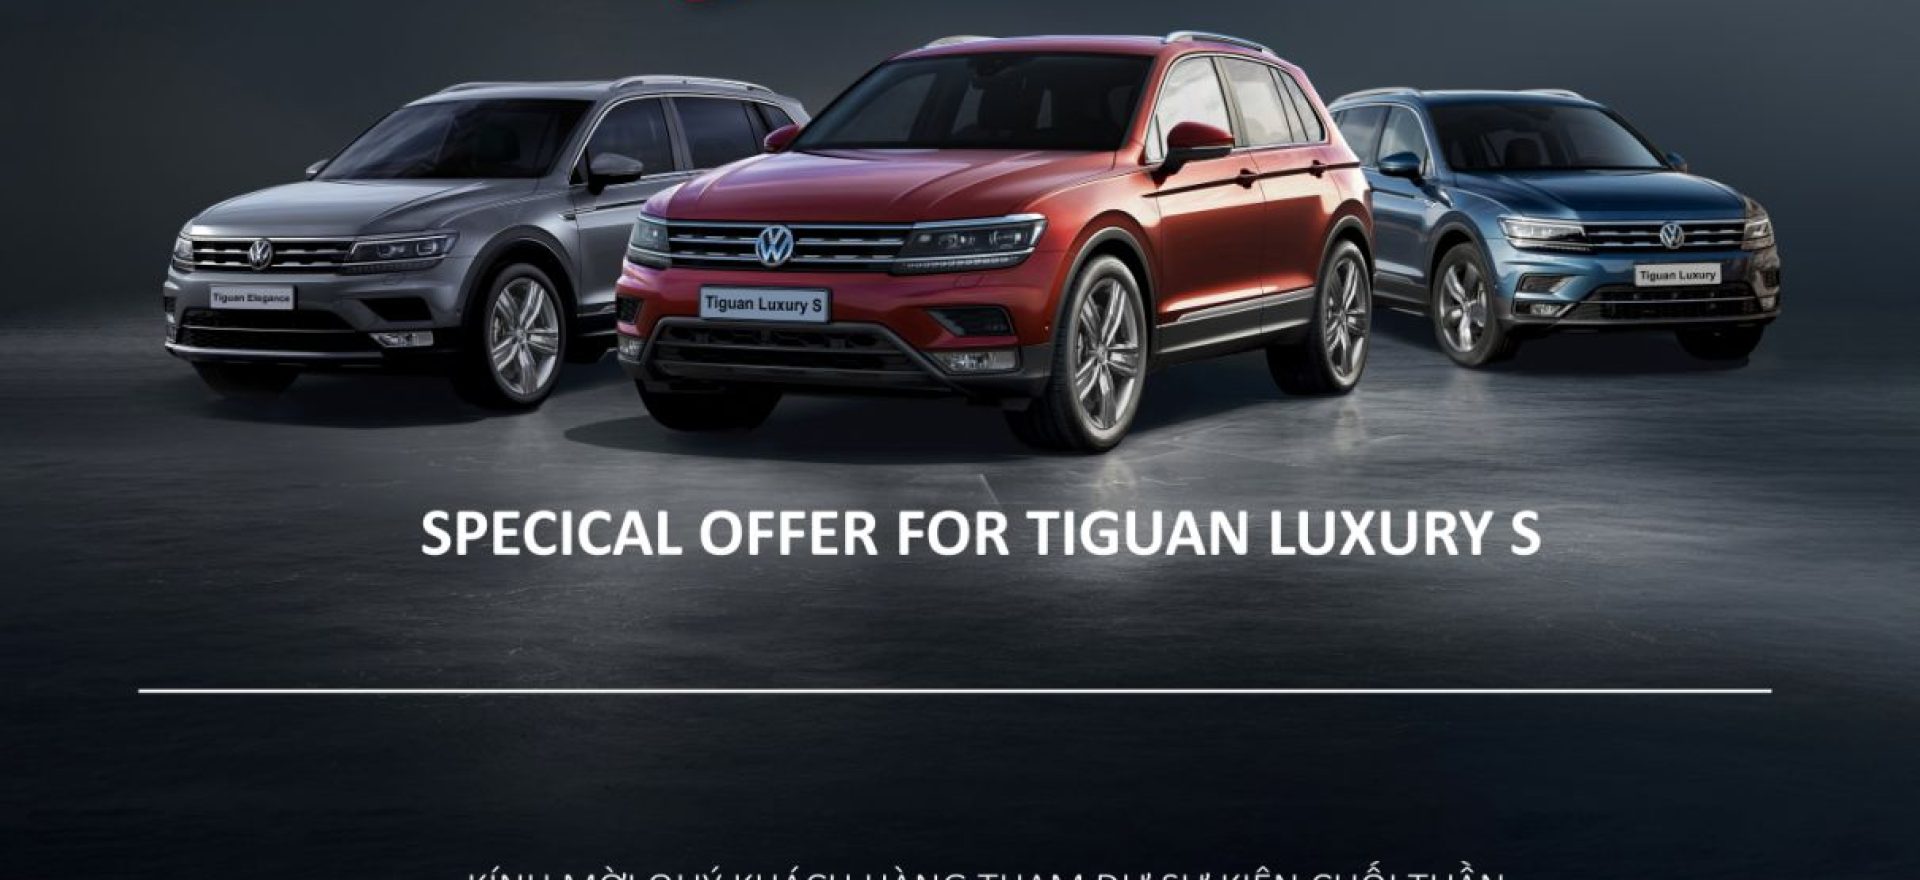 SPECICAL OFFER FOR TIGUAN LUXURY S